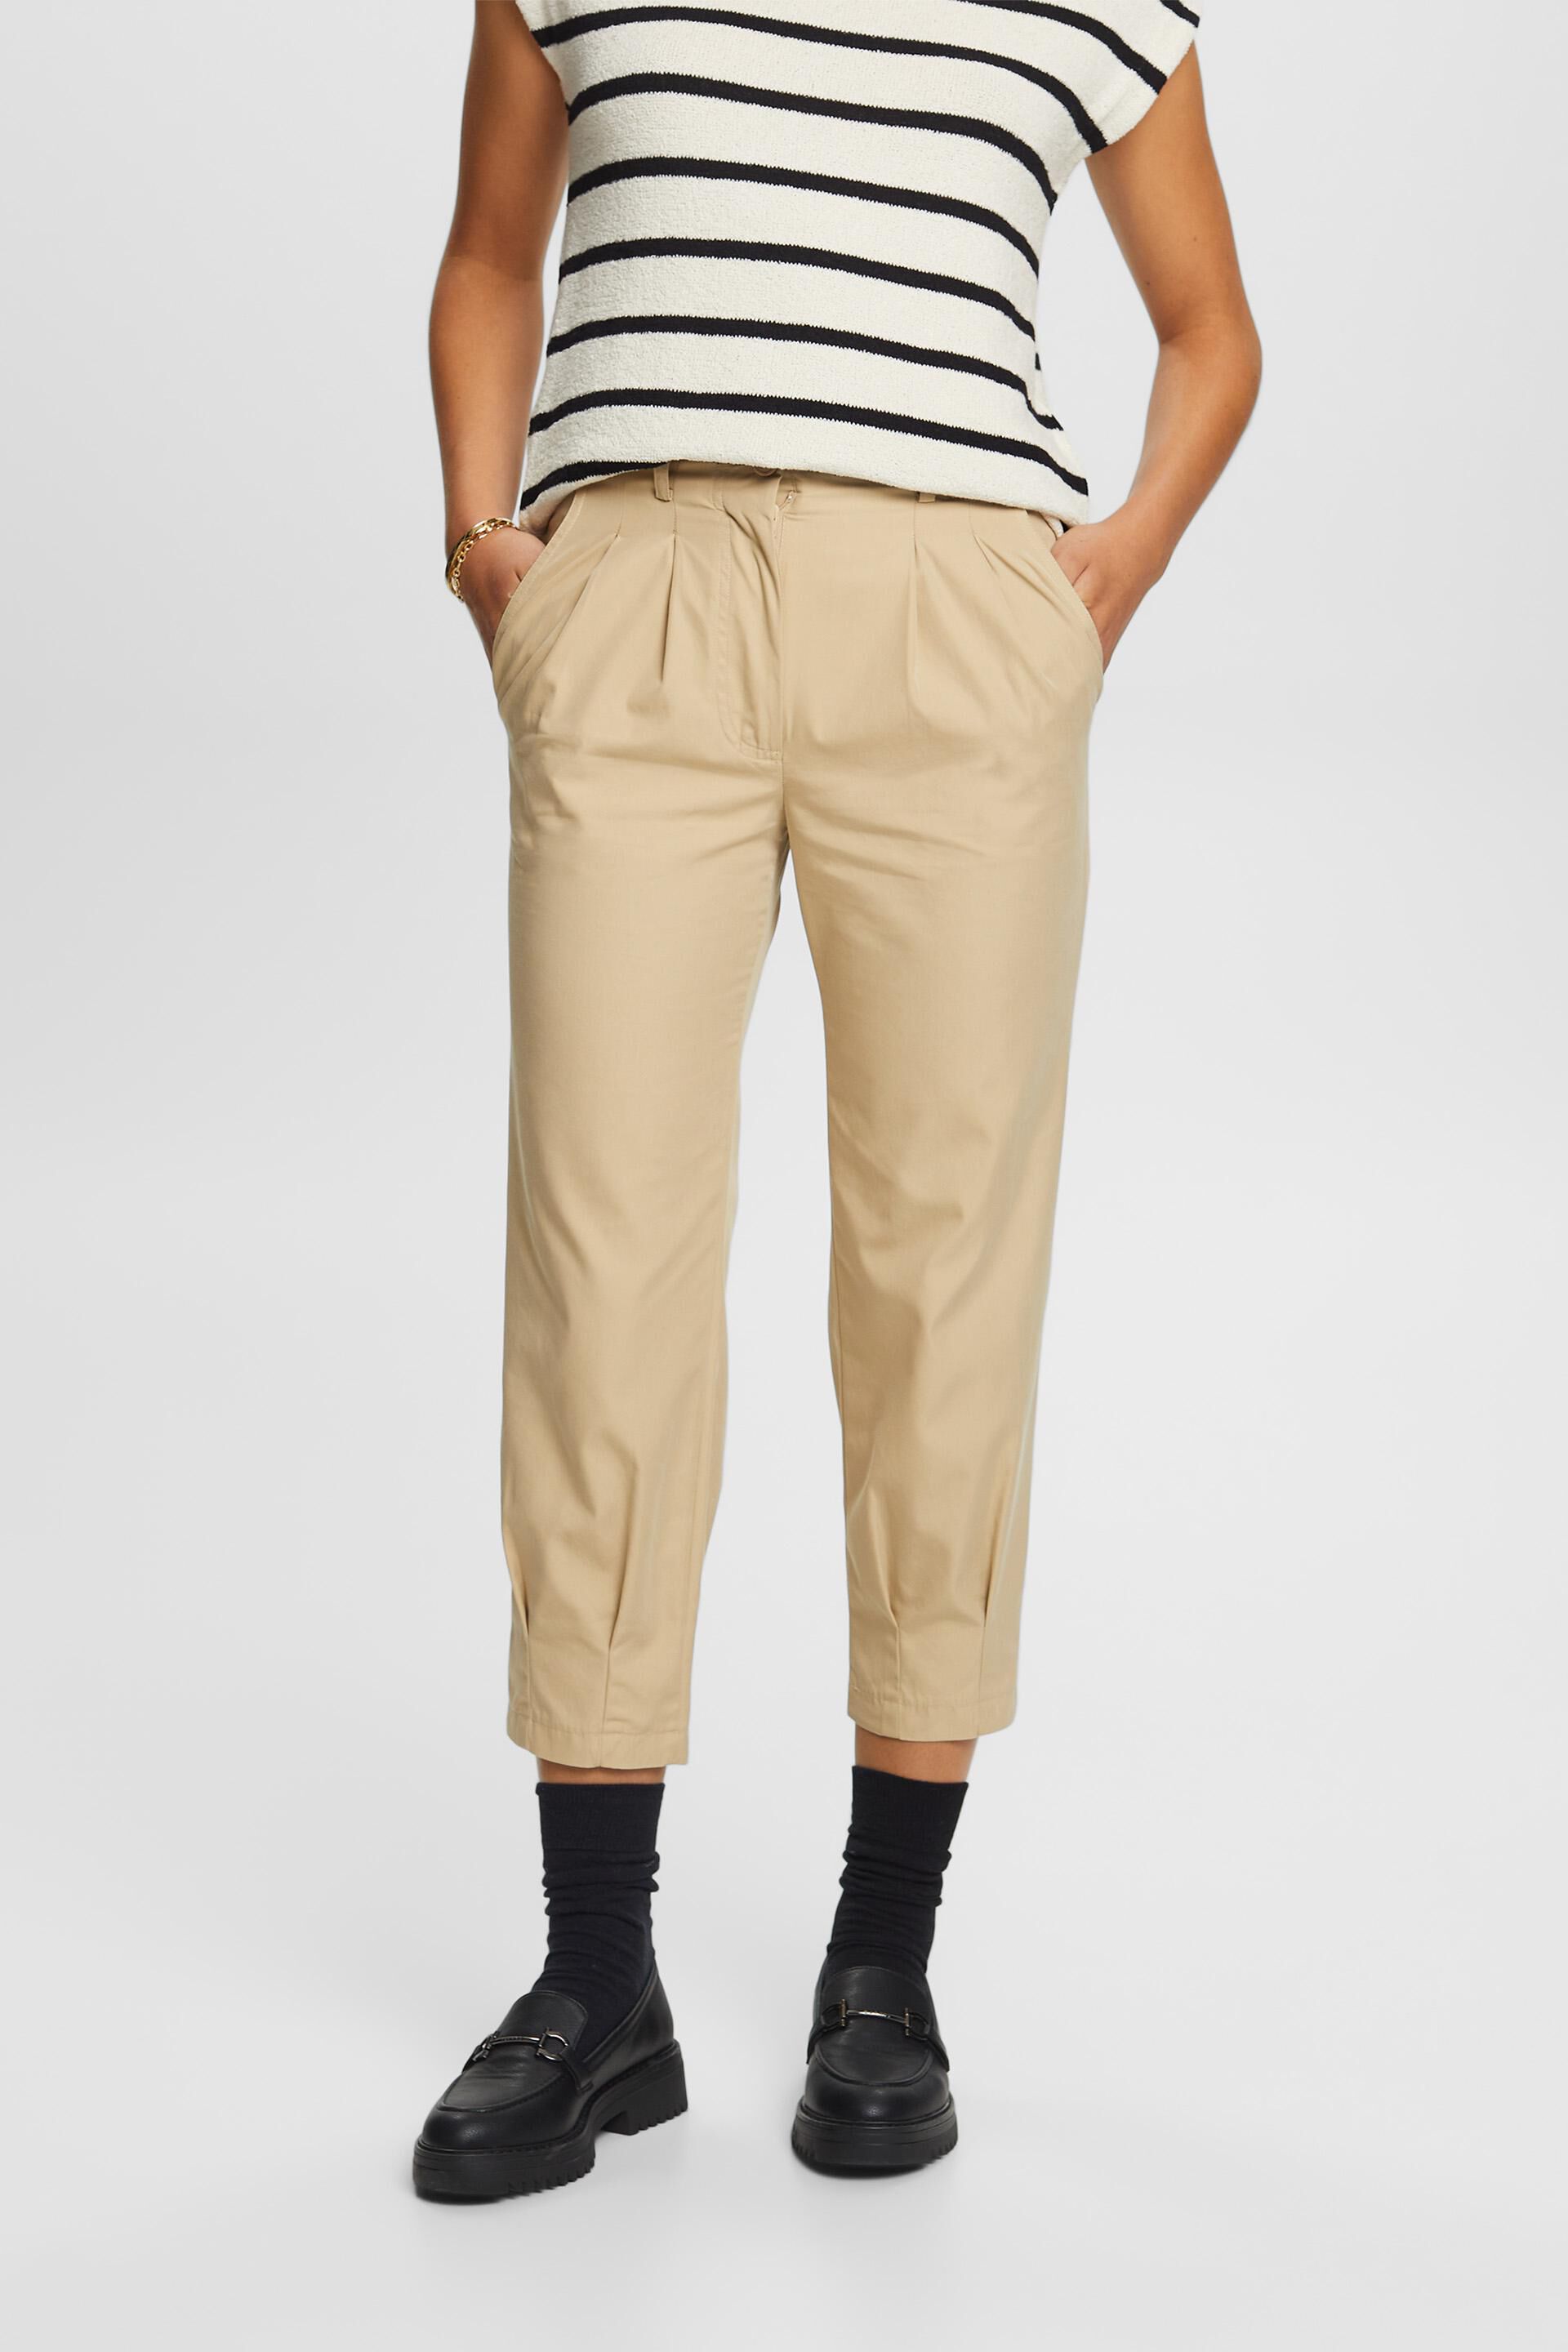 Buy ONLY & SONS Mens Kent Cropped Chinos Dark Navy